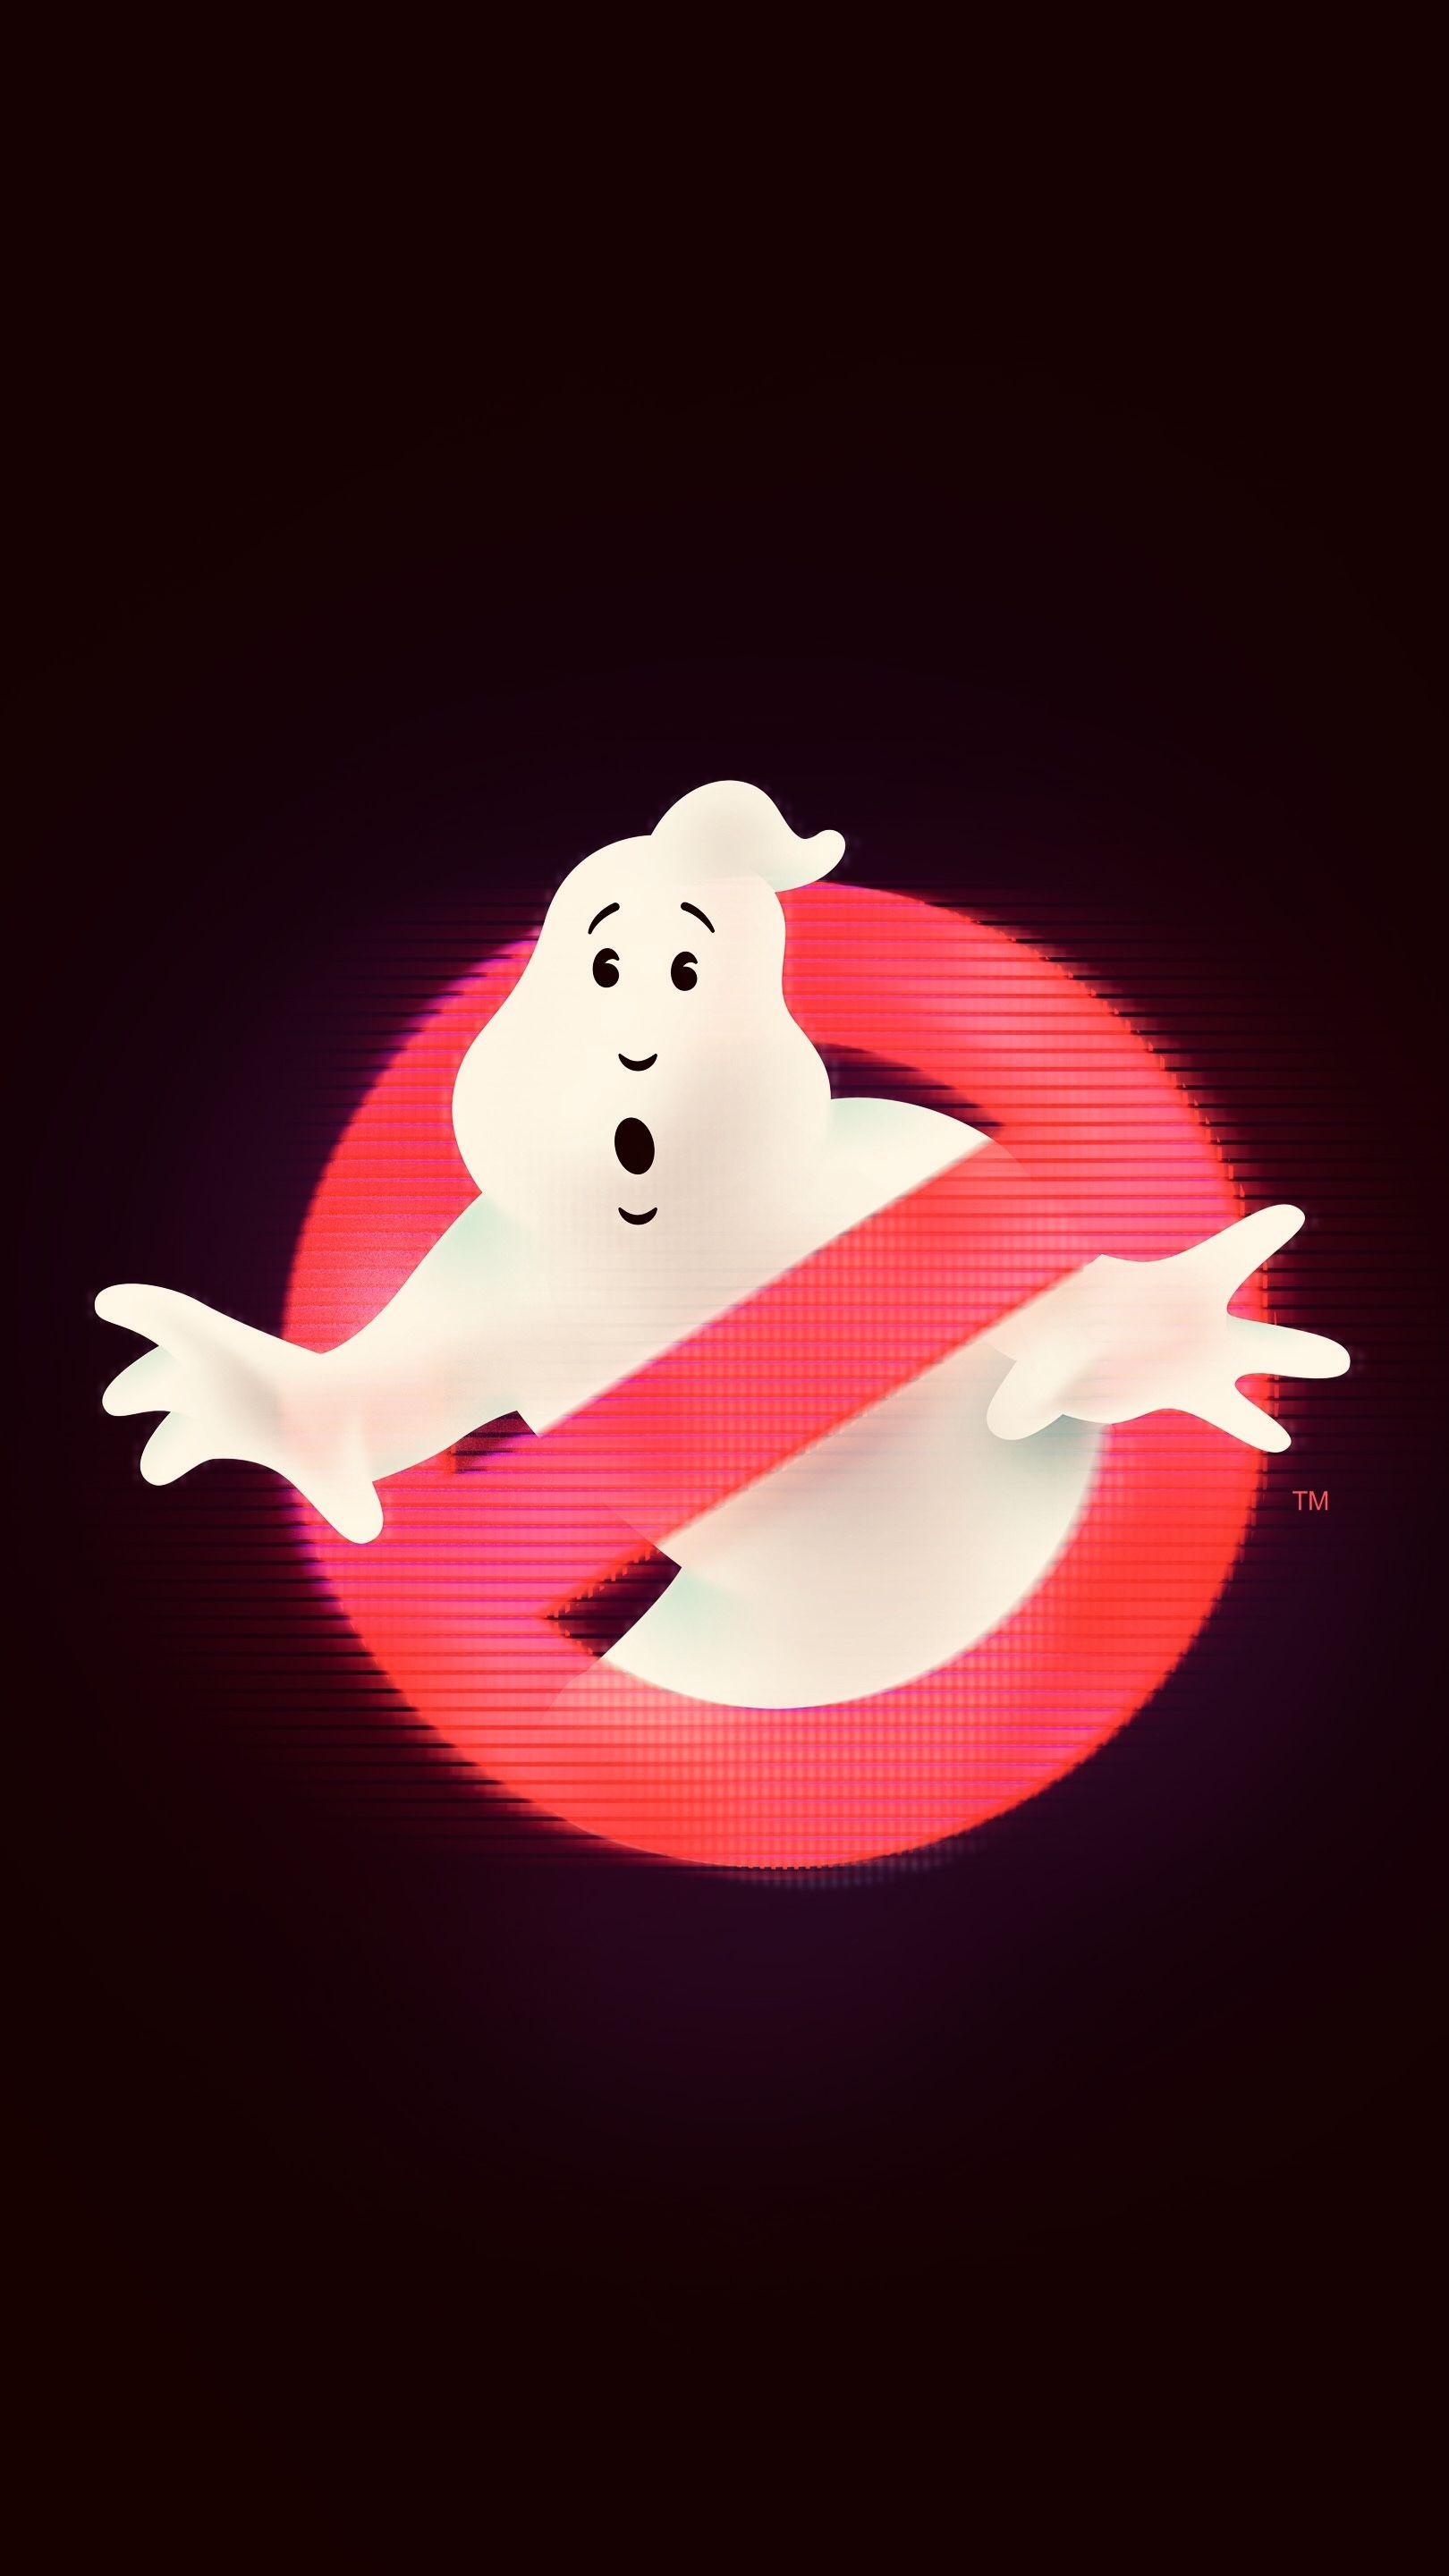 Ghostbusters: A unique ghost removal service in New York City, Horror-comedy. 1620x2880 HD Background.